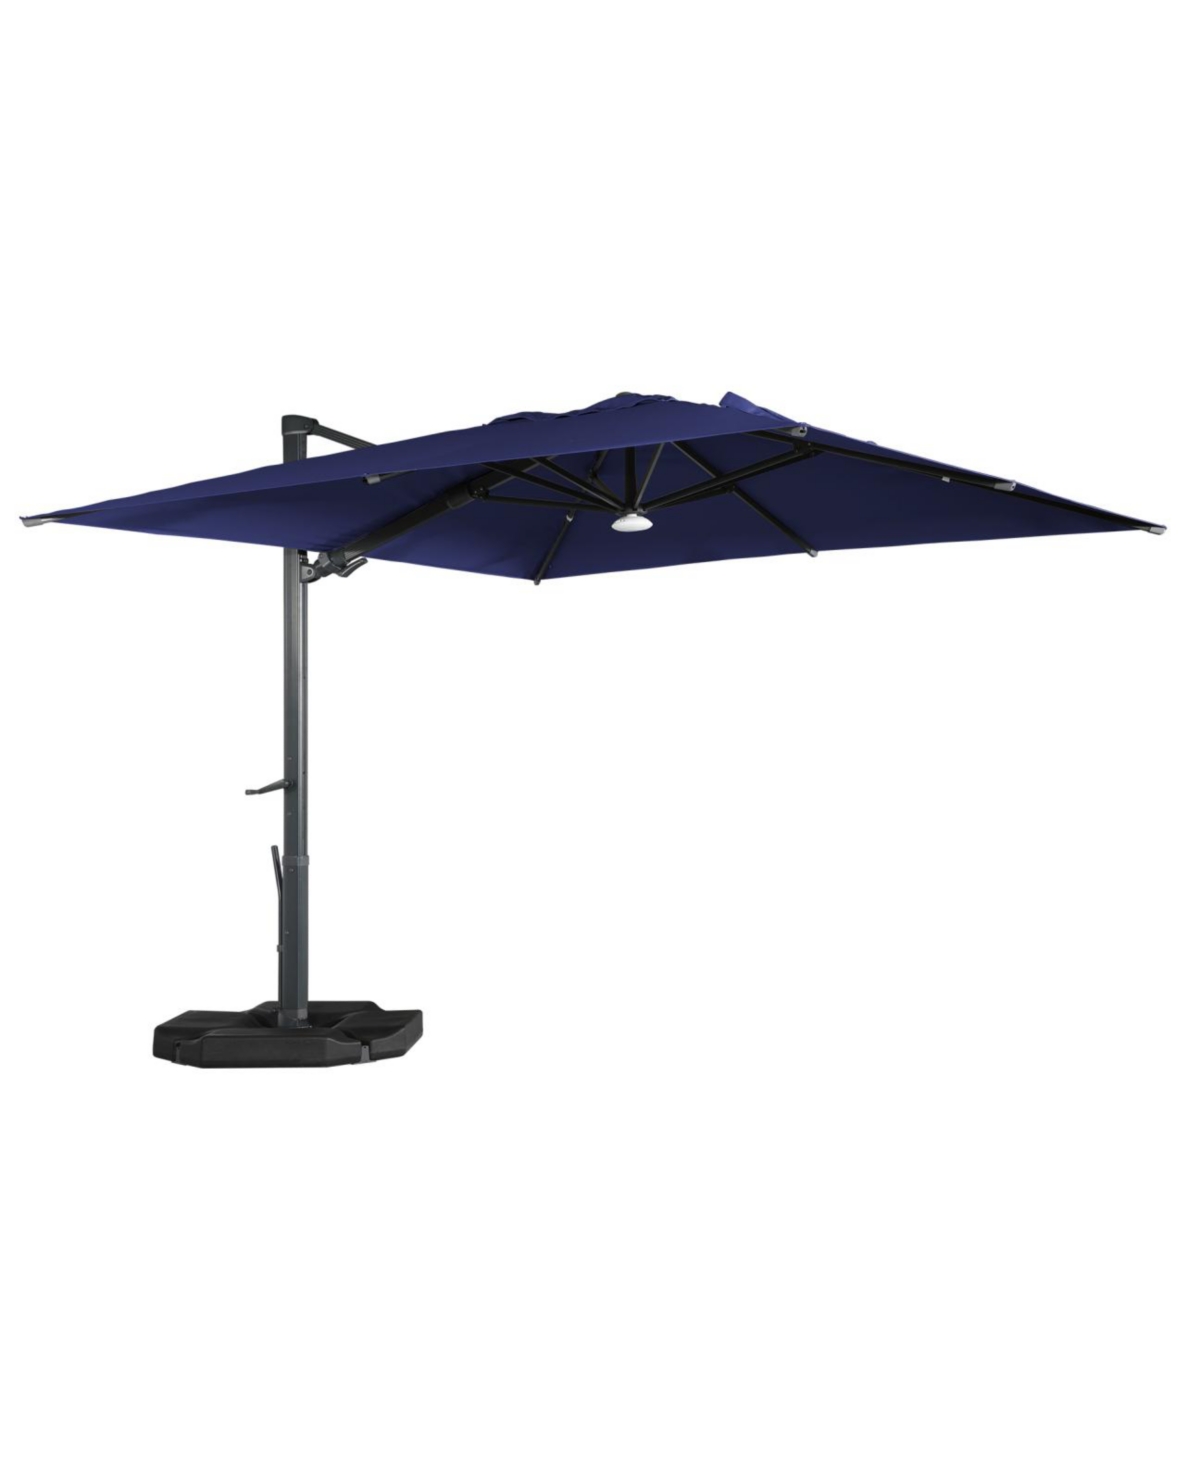 10ft Square Solar Led Cantilever Patio Umbrella with Included Base Stand & Bluetooth Light - Gray